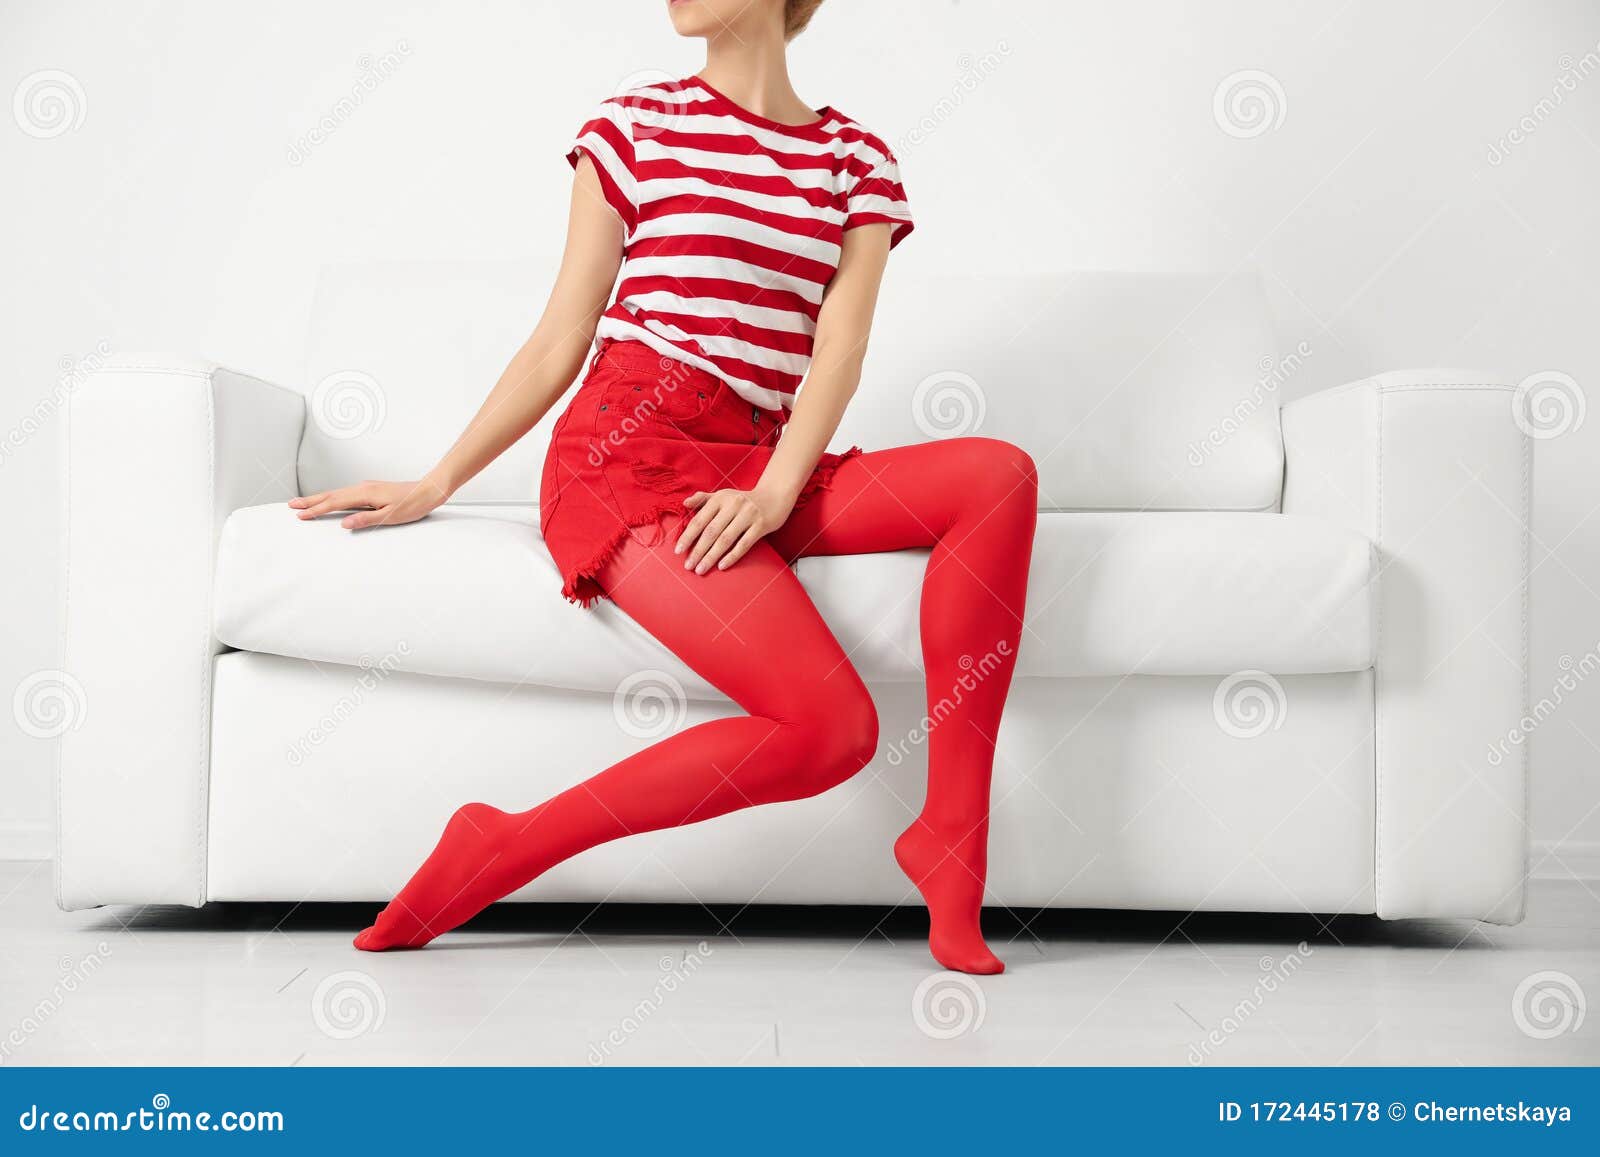 Red Nylons